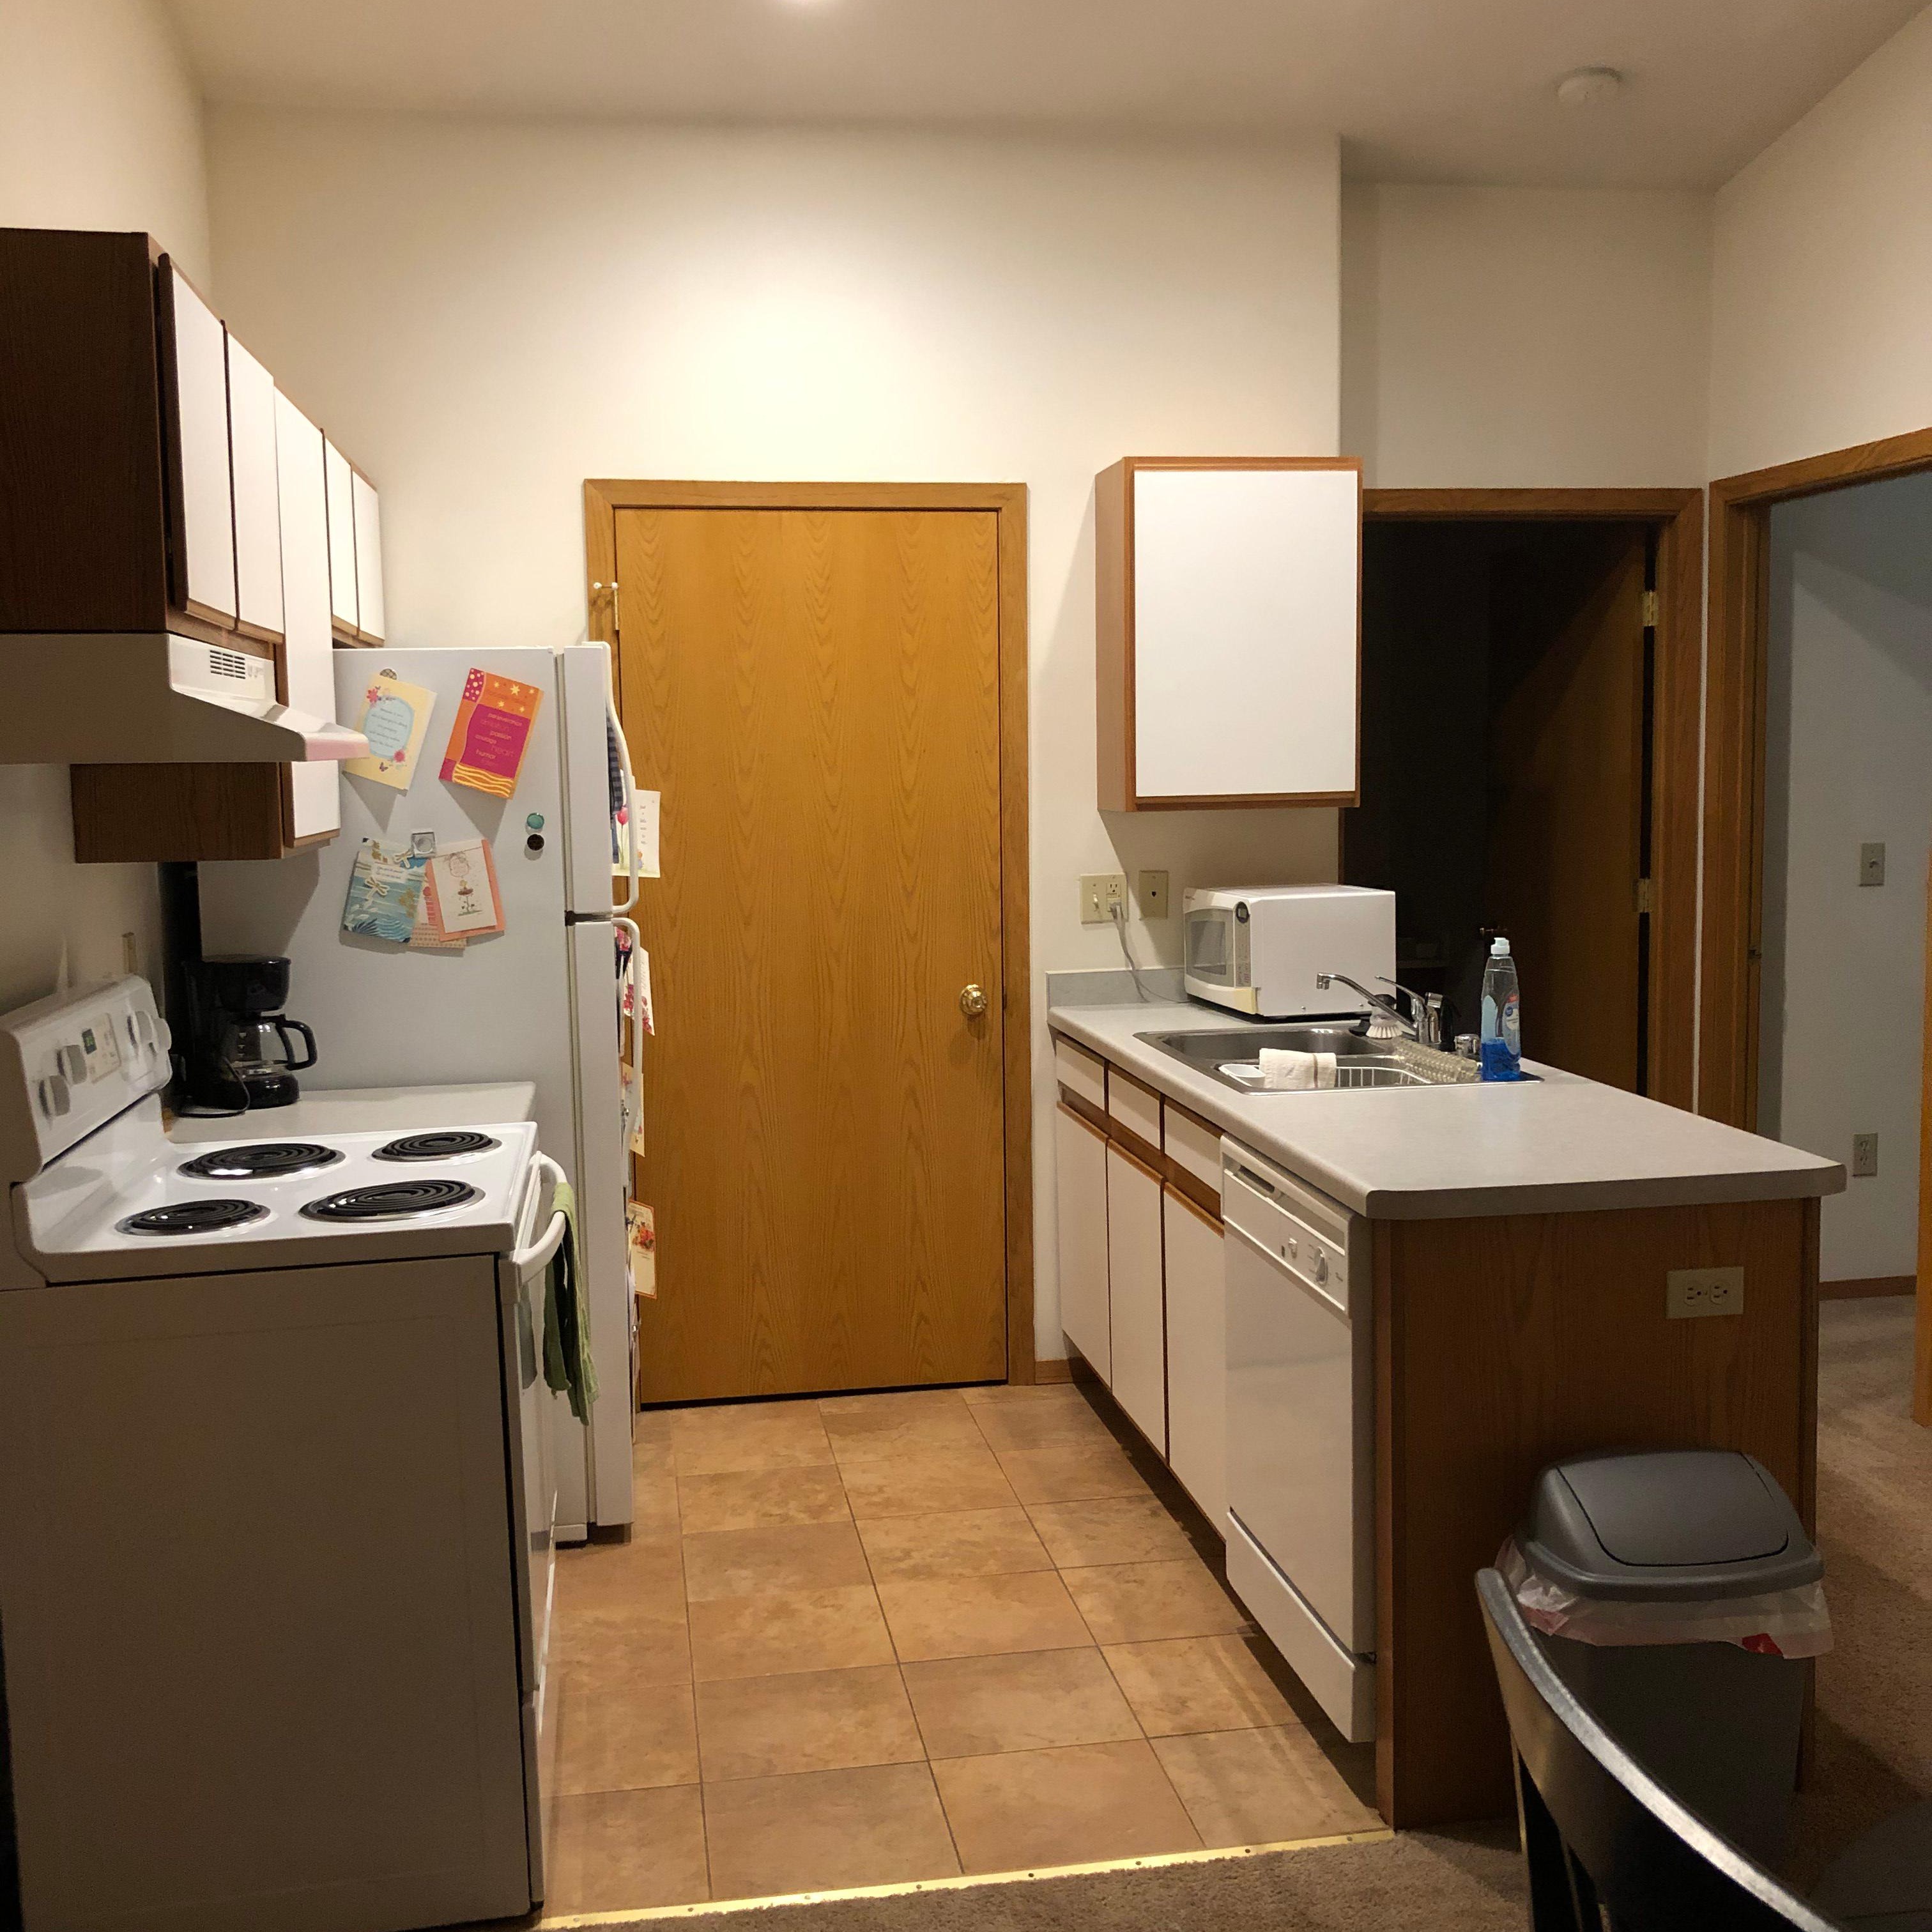 Woodsview Apartments Galley Kitchen with white cupboards